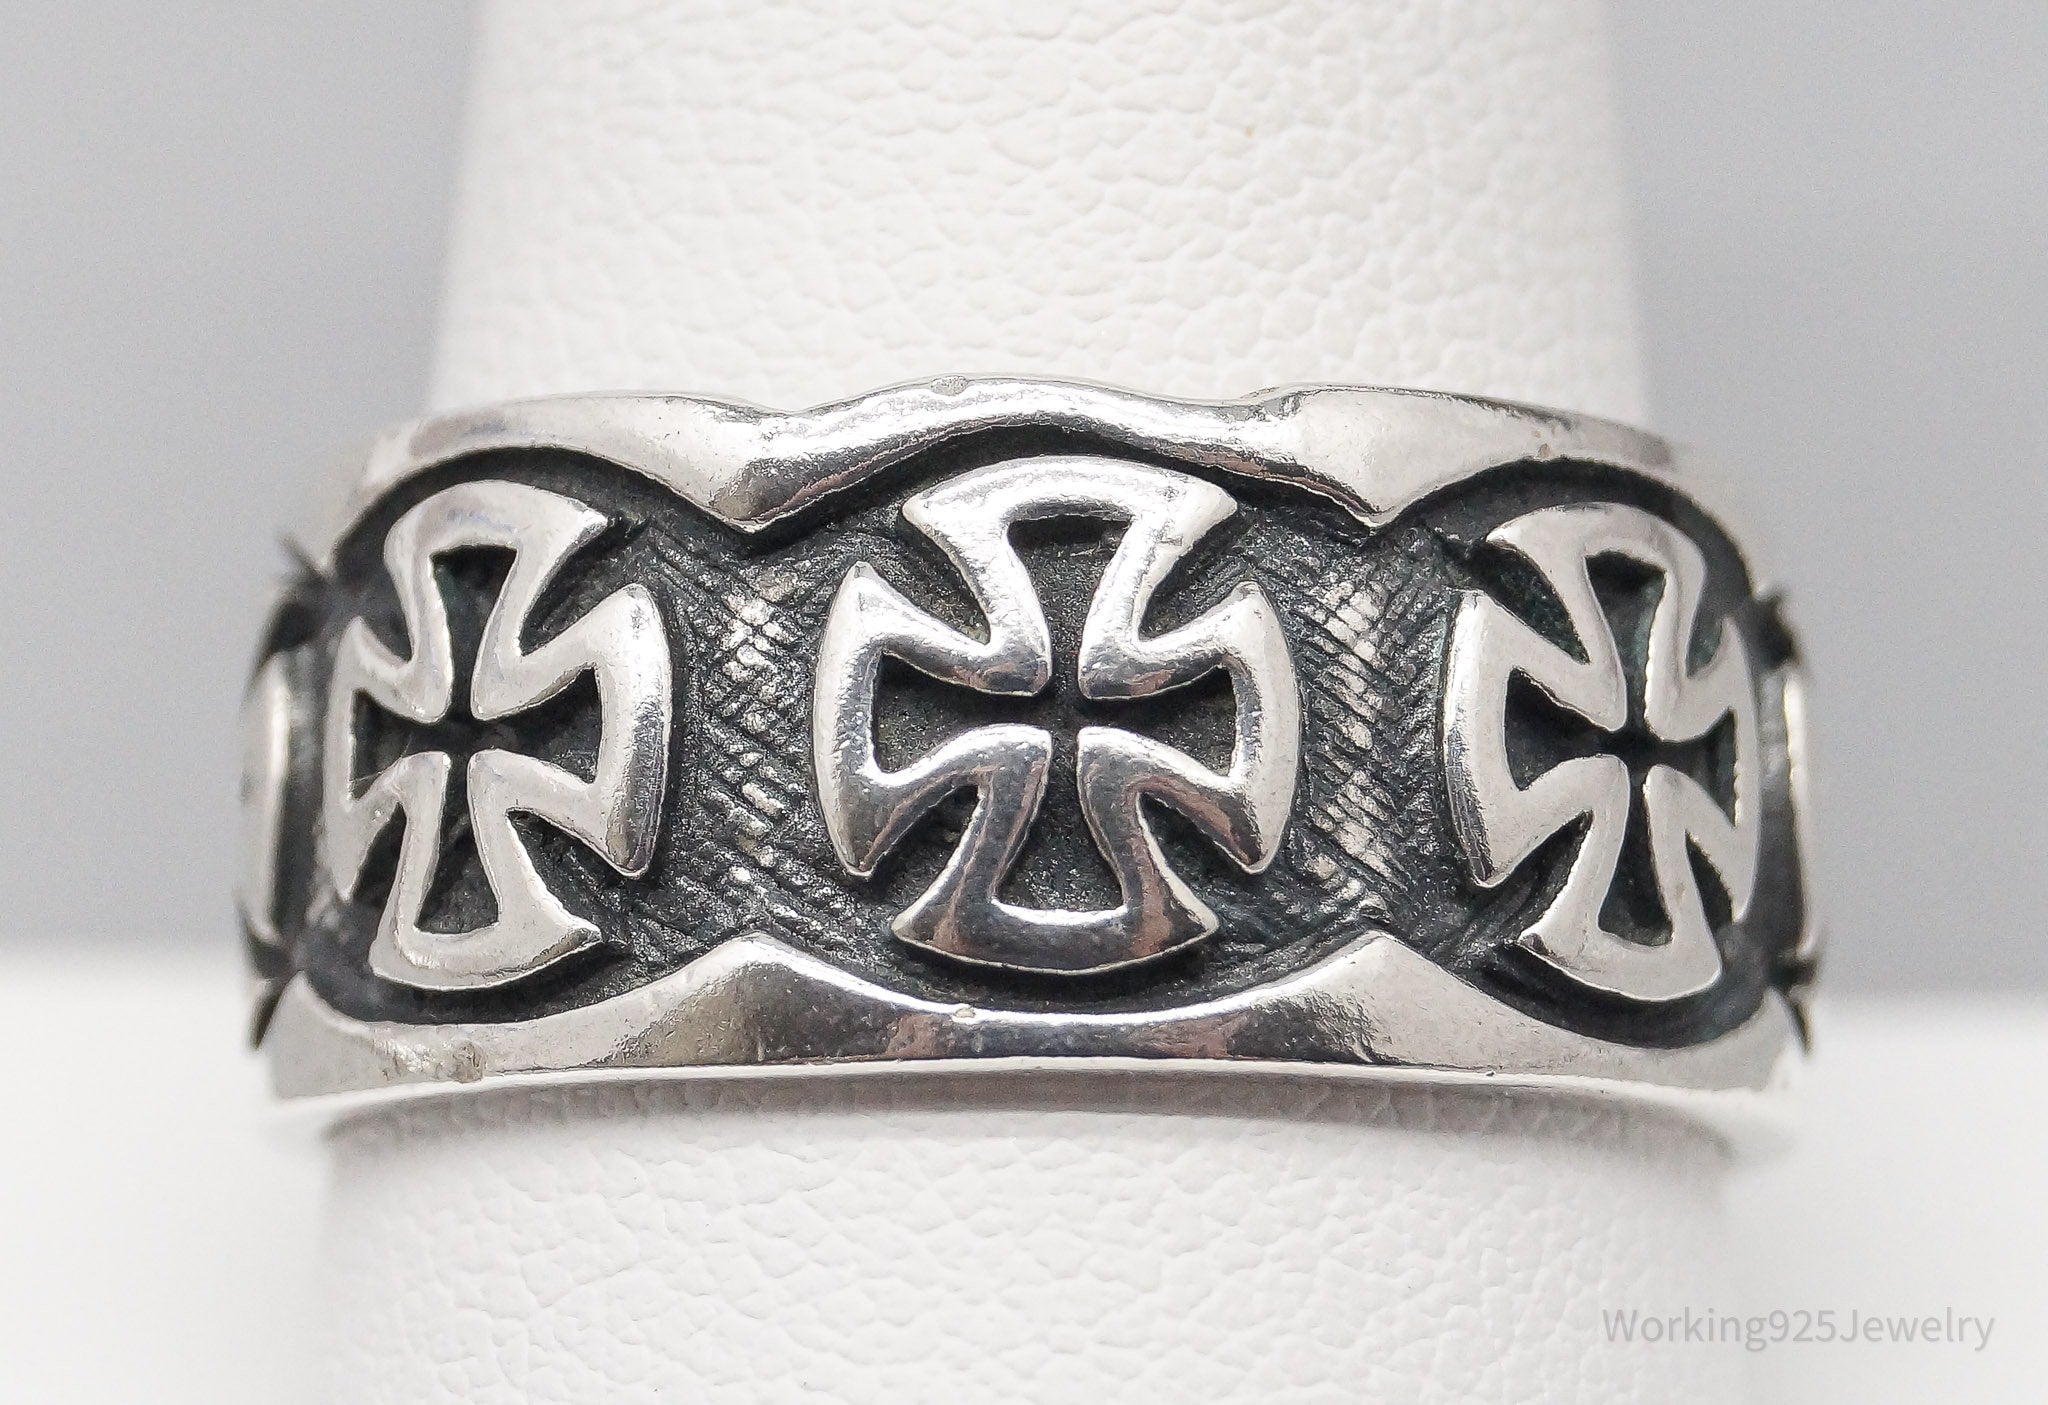 Vintage 103 Iron Crosses Sterling Silver Band Ring - Size 10.5